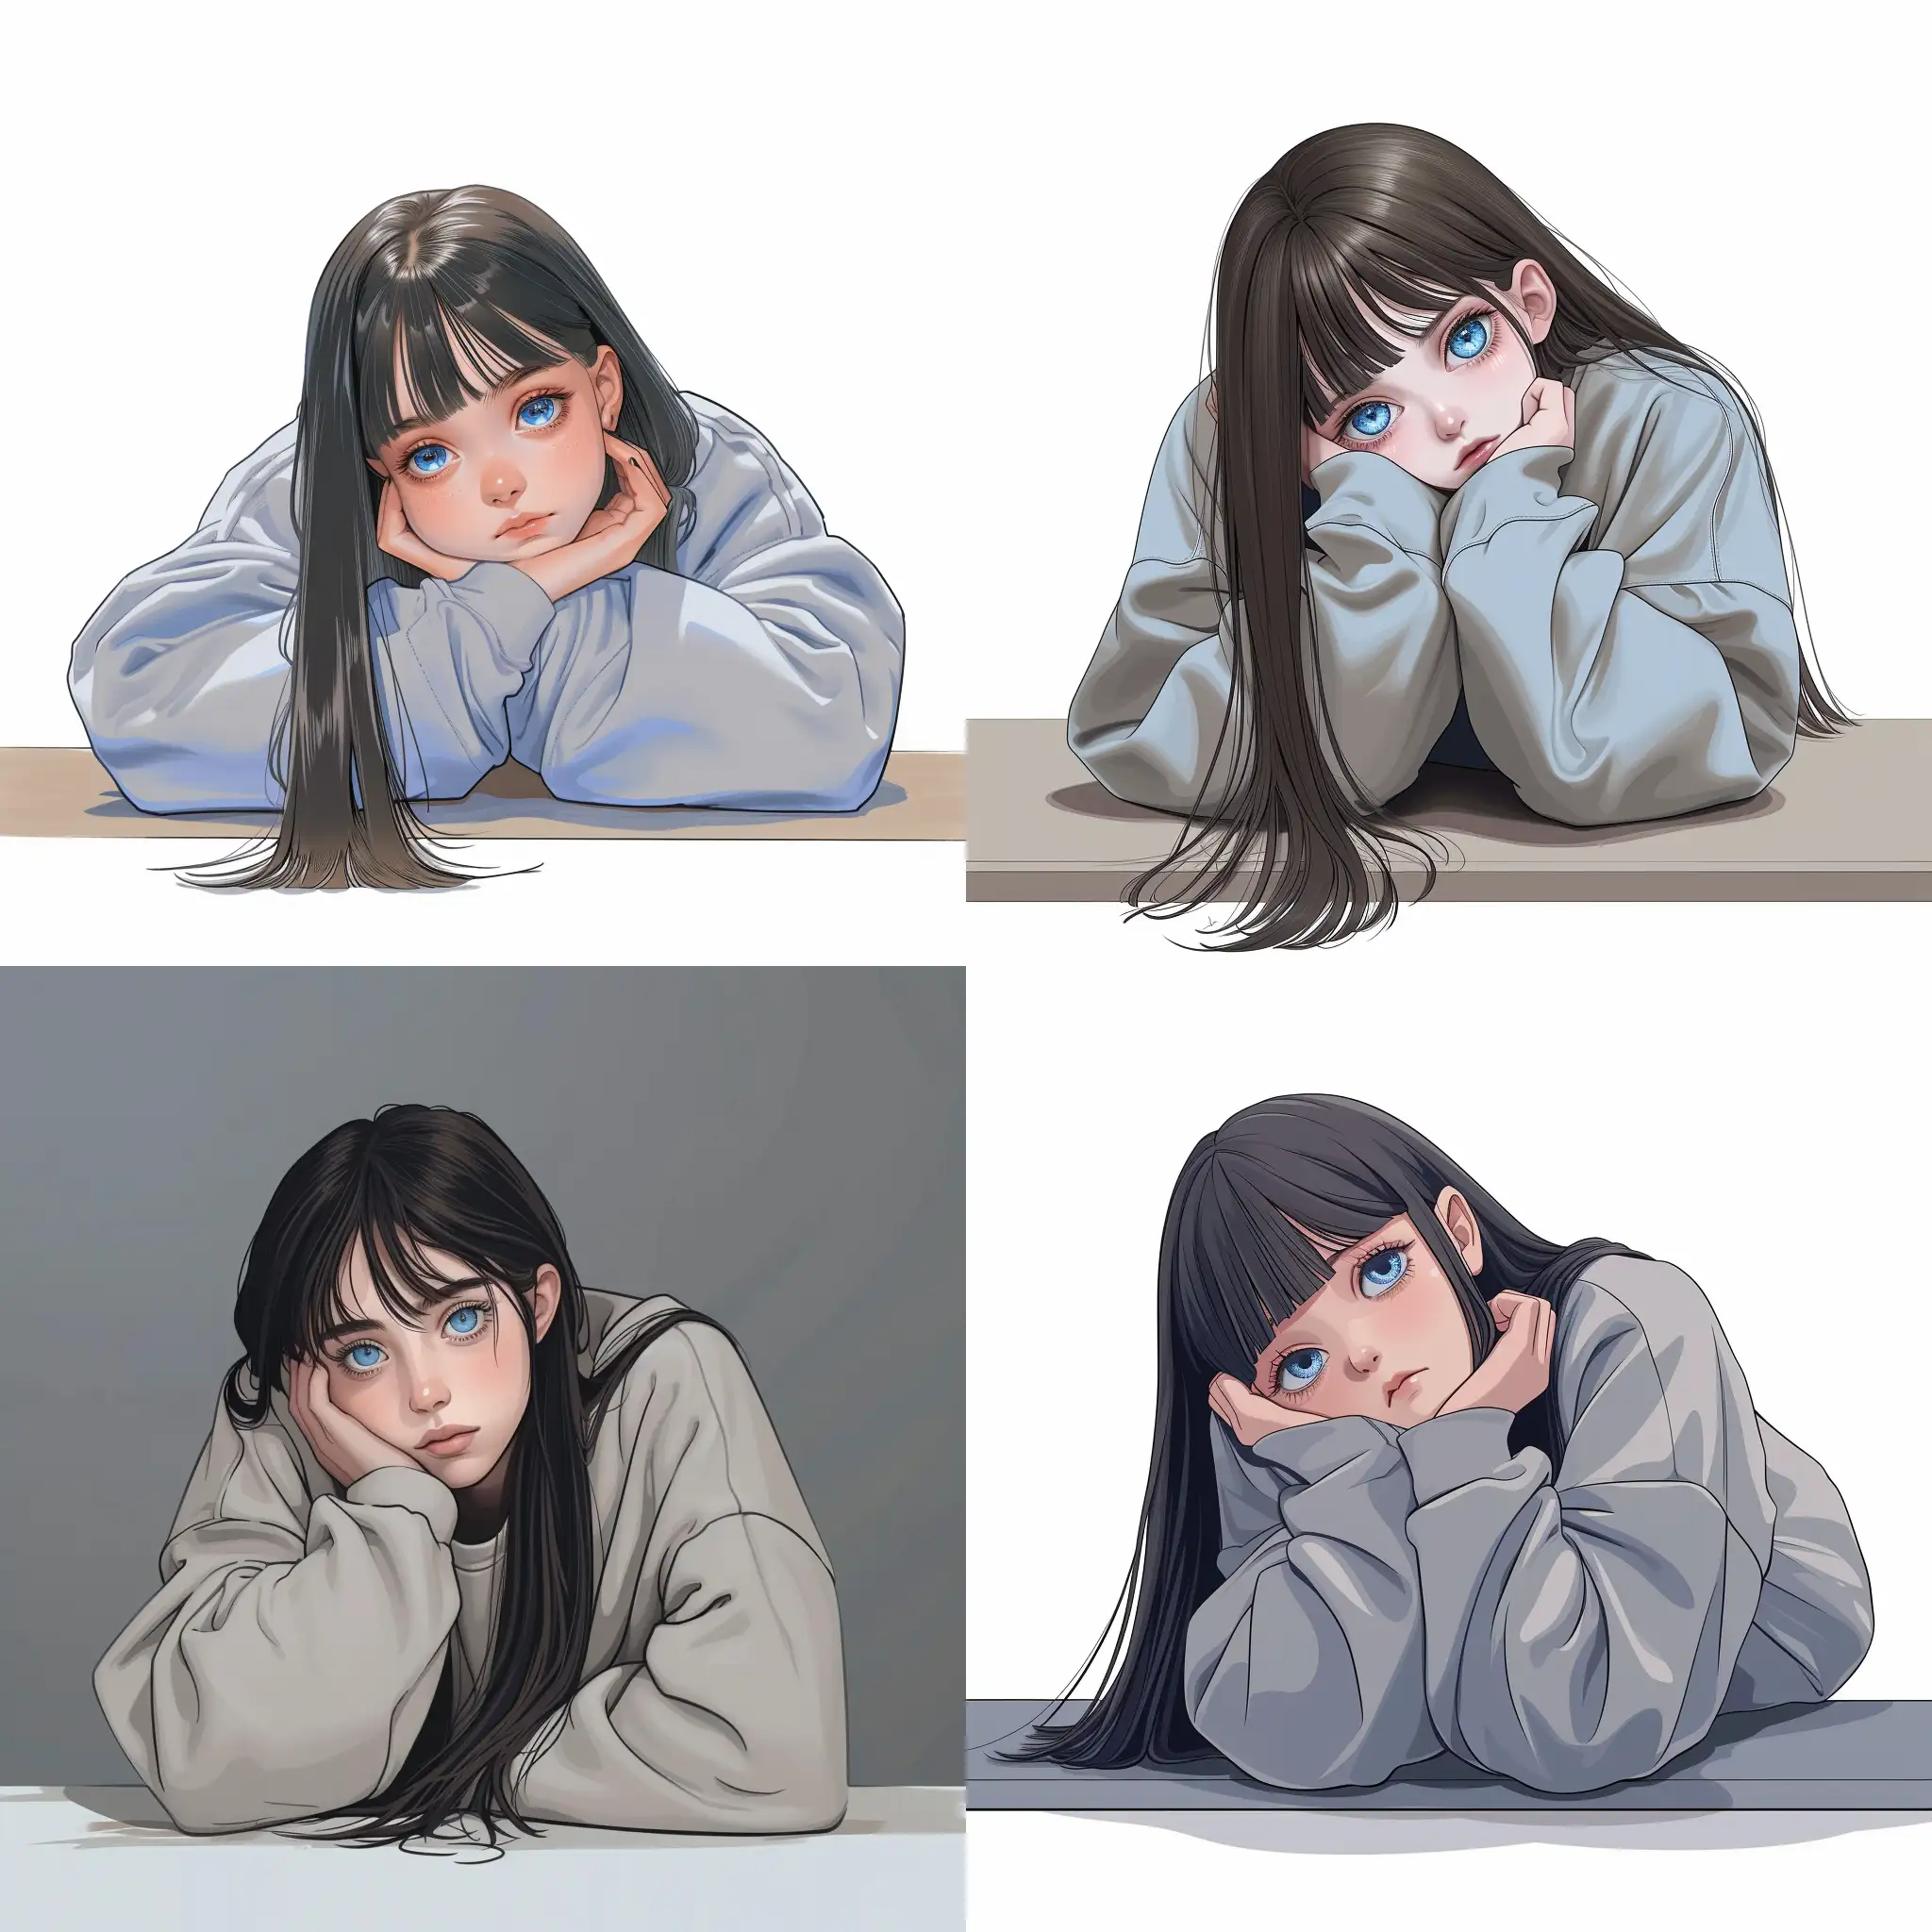 Cozy-Teenager-Napping-on-Table-in-Oversize-Sweatshirt-High-Detail-Cartoon-Art